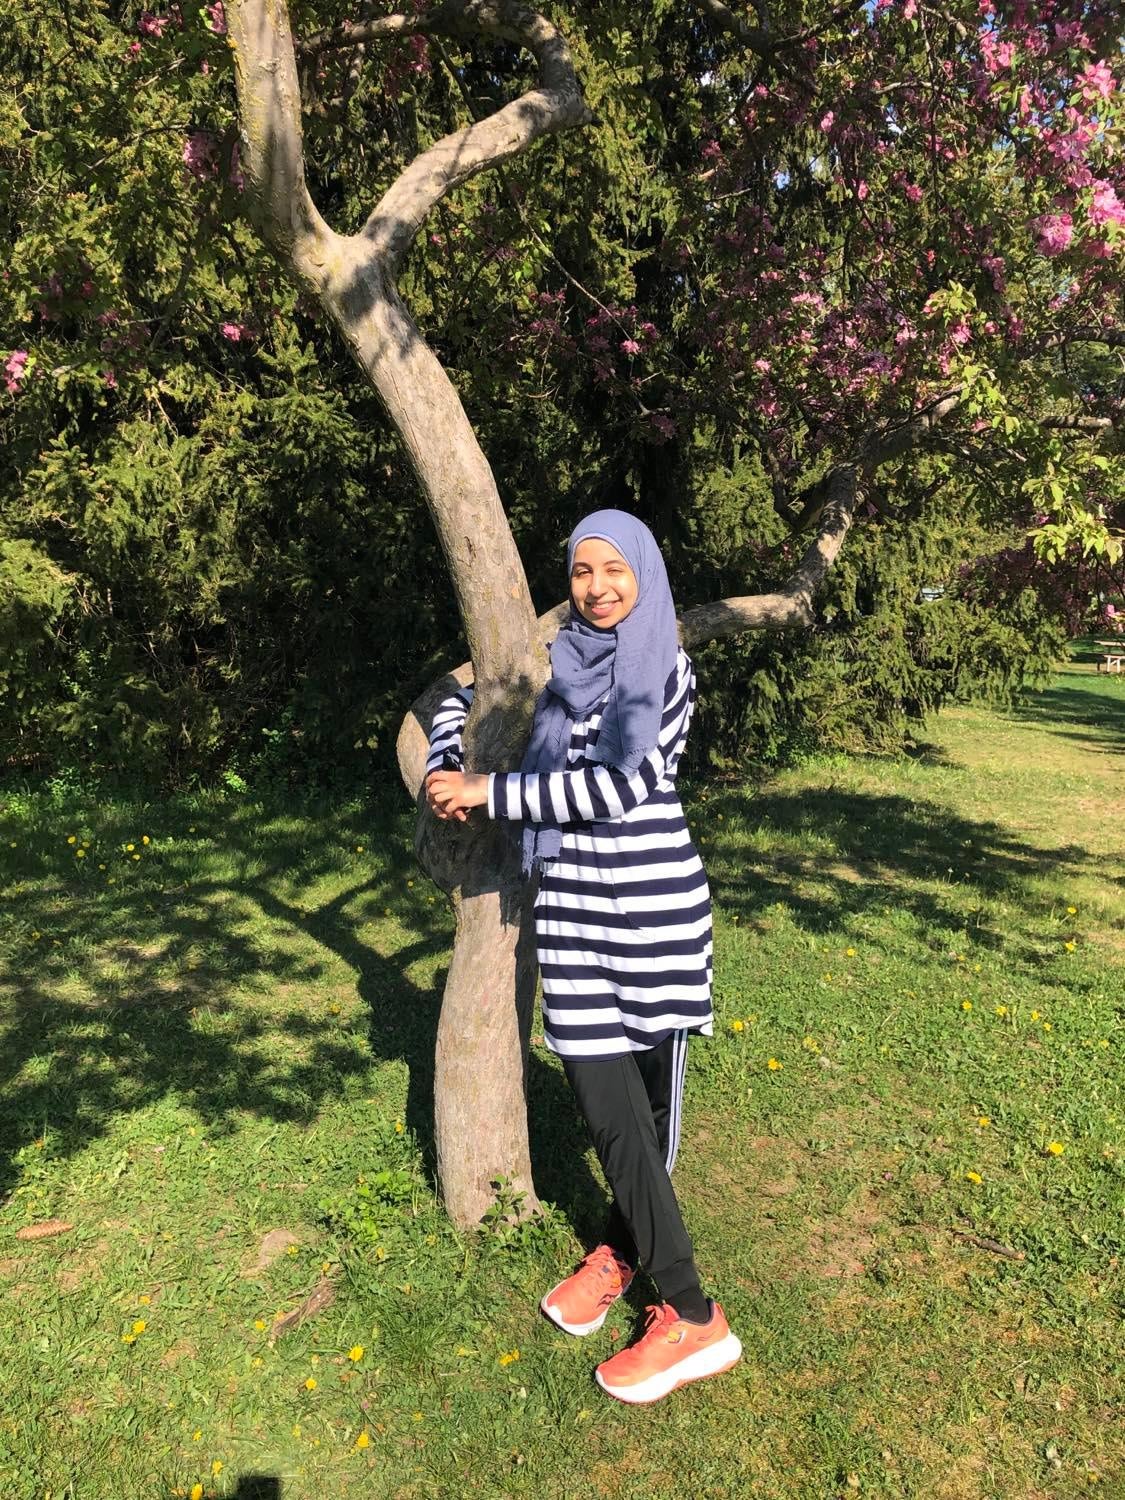 A photo of Fatima standing and smiling with her arms wrapped around a tree.